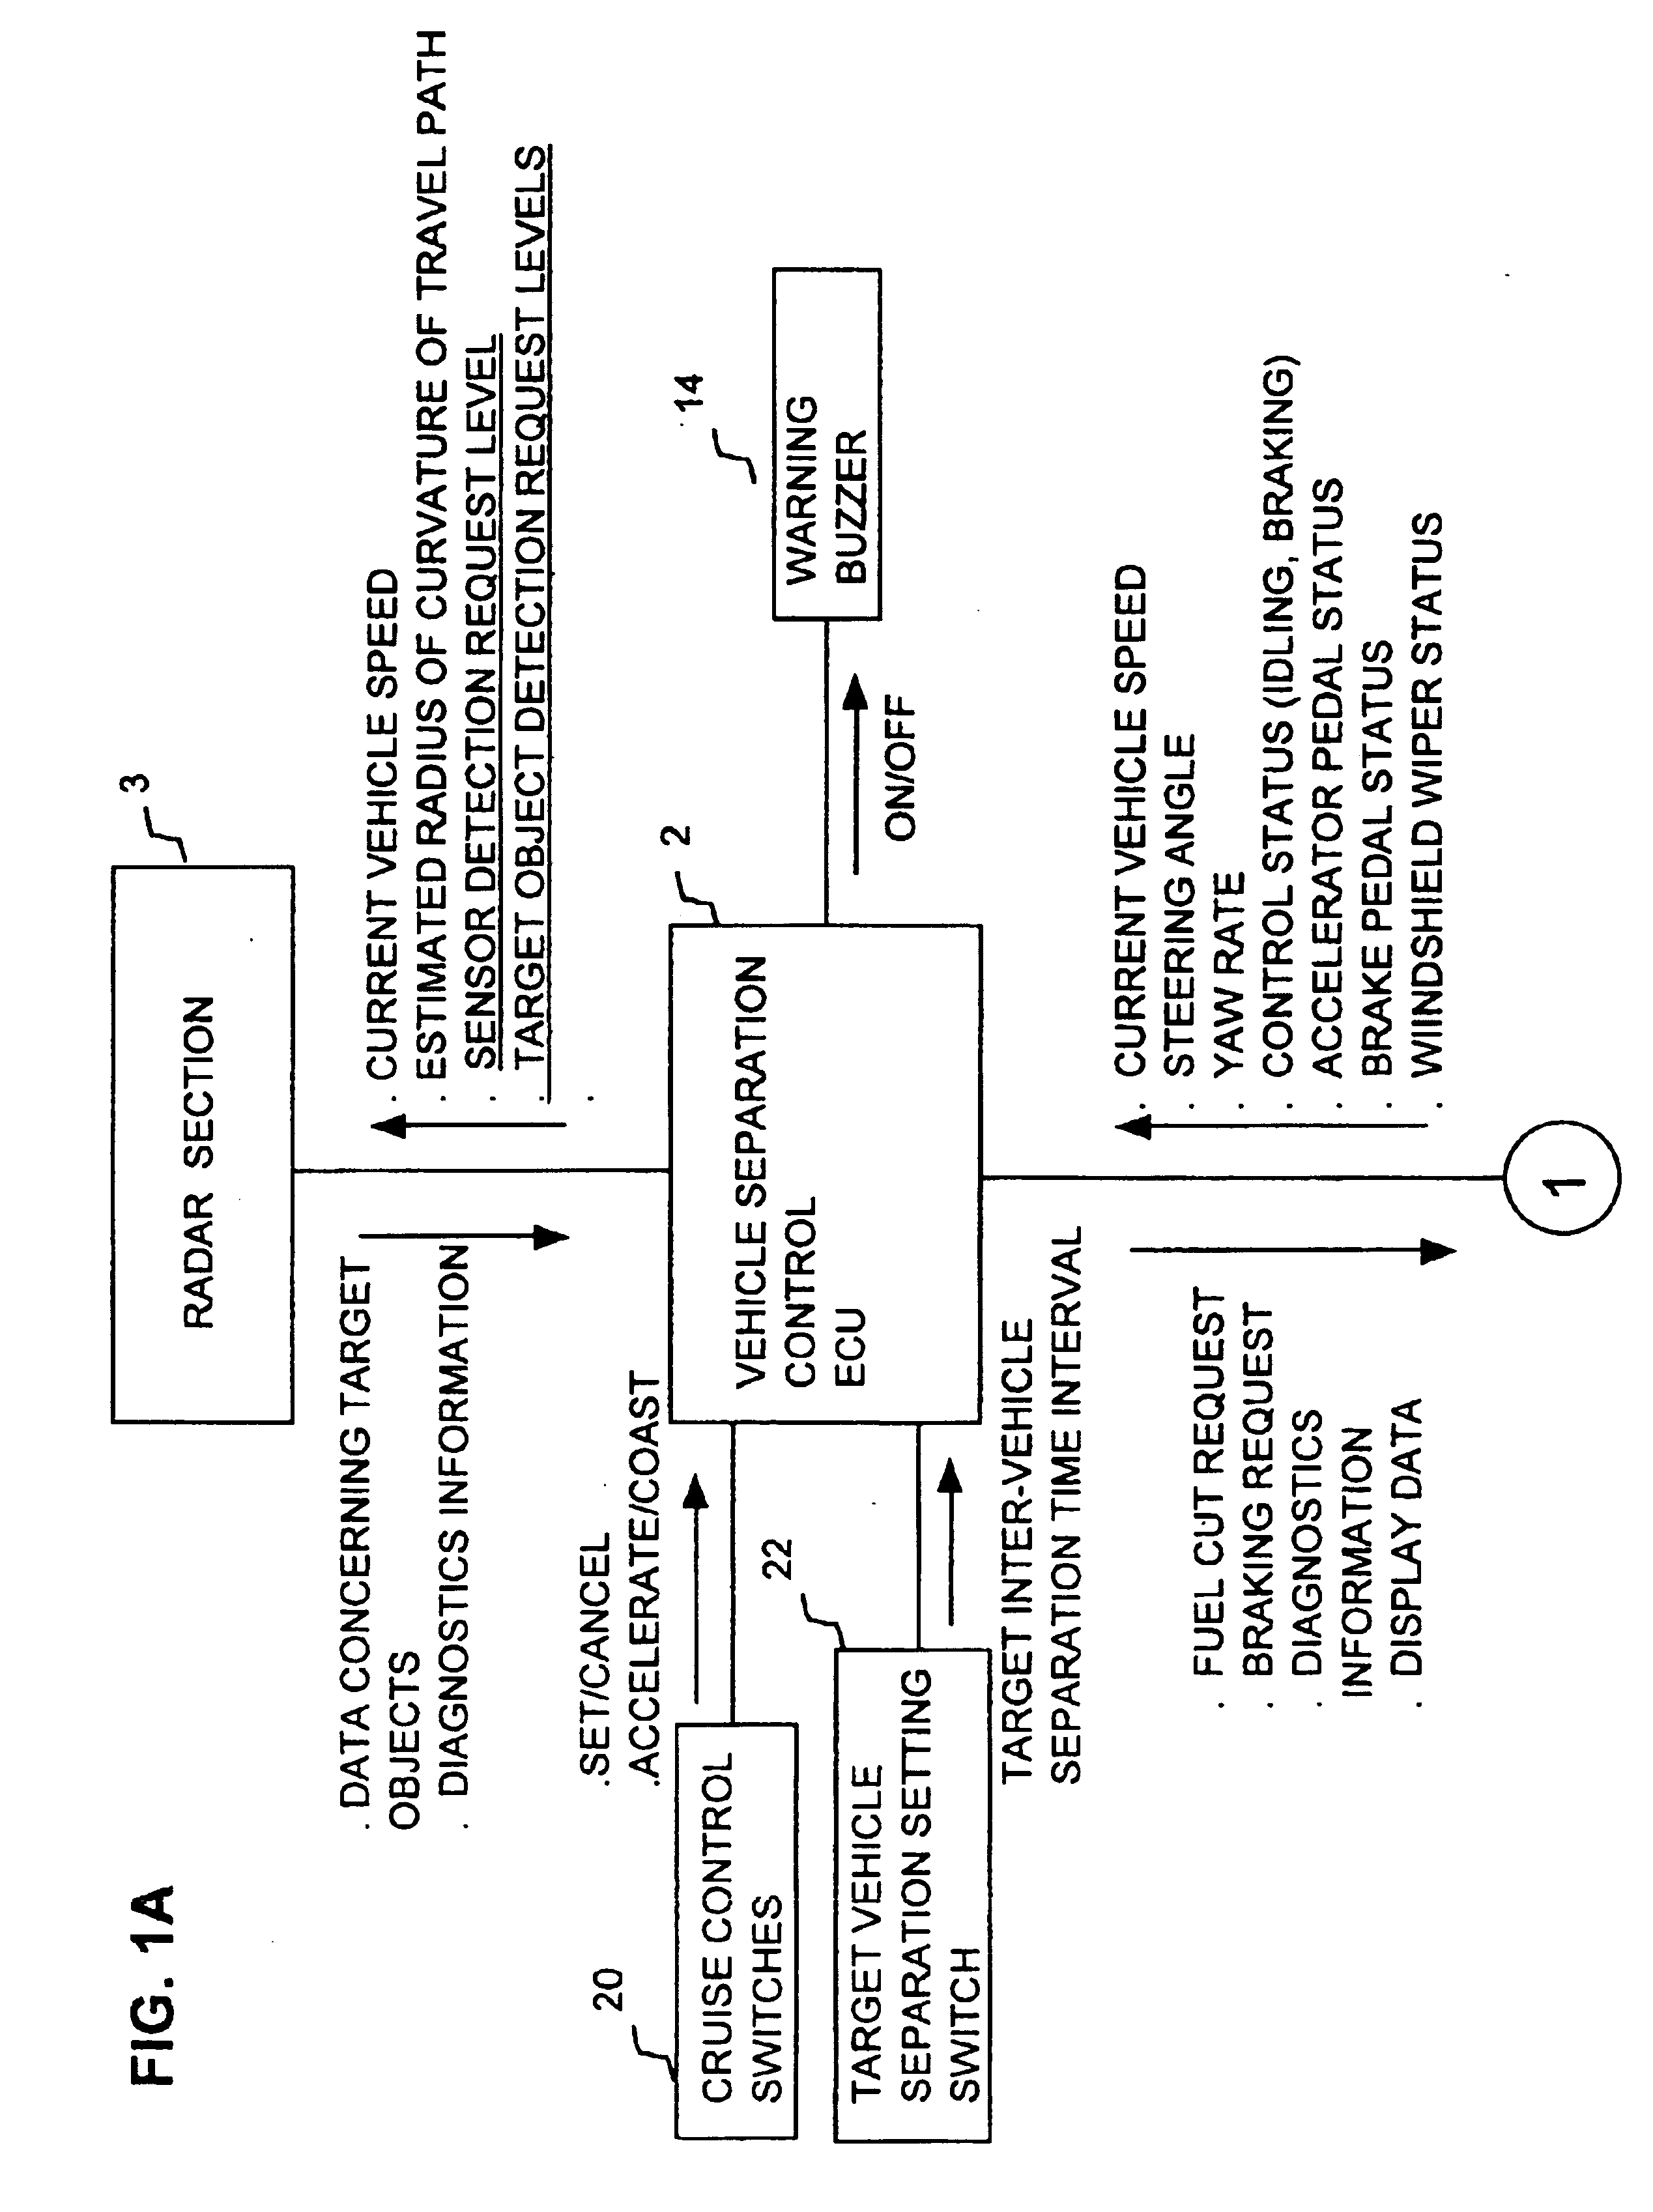 Cruise control apparatus performing automatic adjustment of object recognition processing in response to driver actions relating to vehicle speed alteration